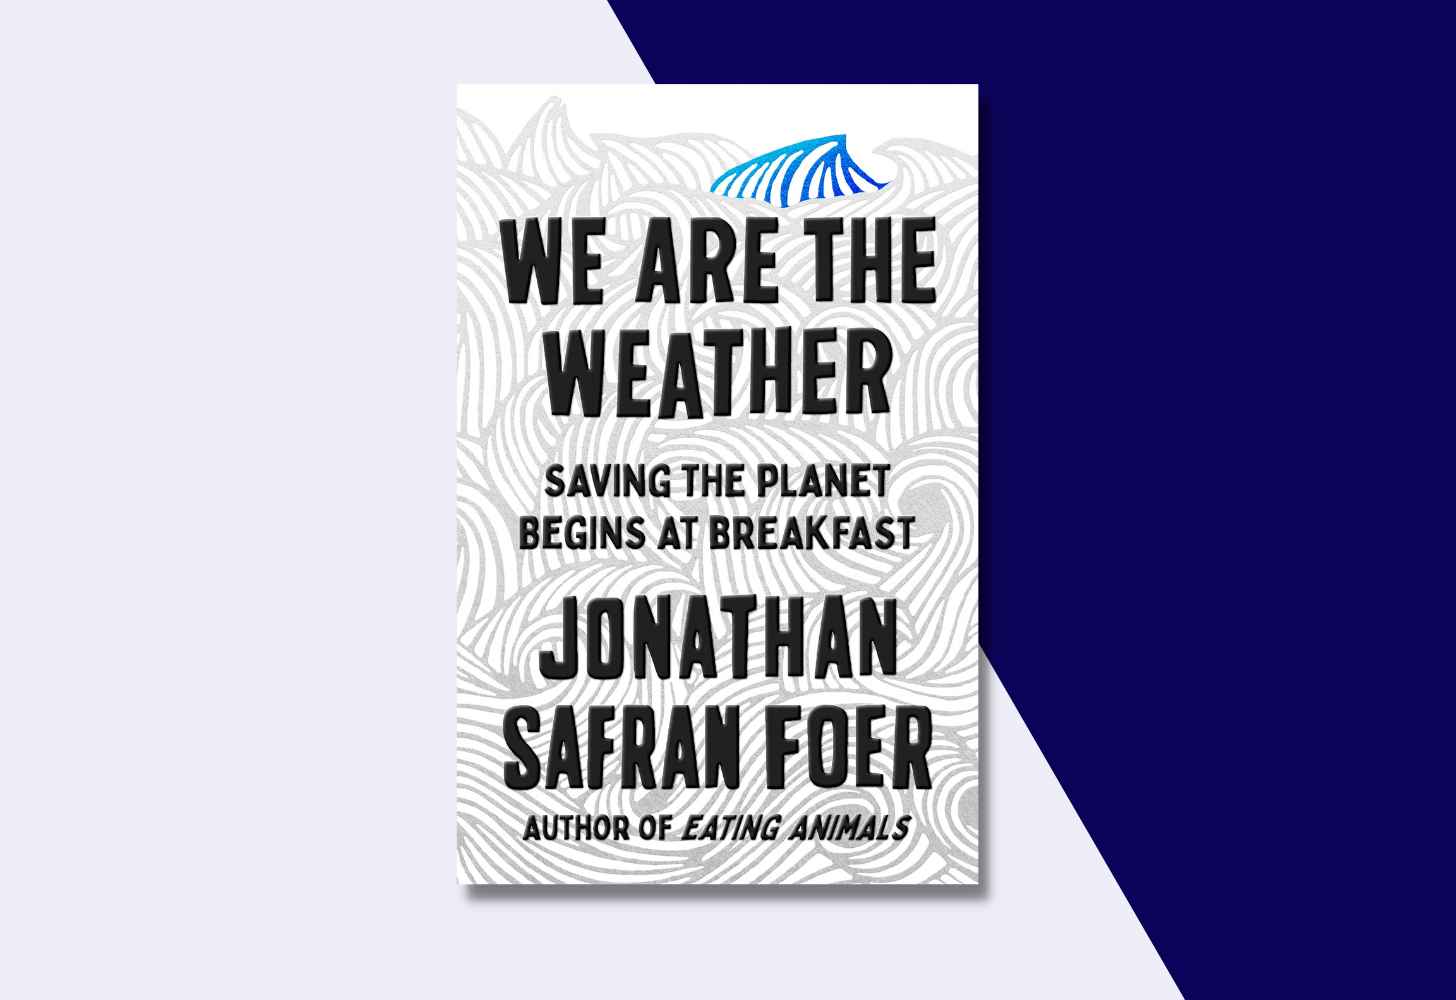 The Cover Of “We Are the Weather: Saving the Planet Begins at Breakfast” by Jonathan Safran Foer